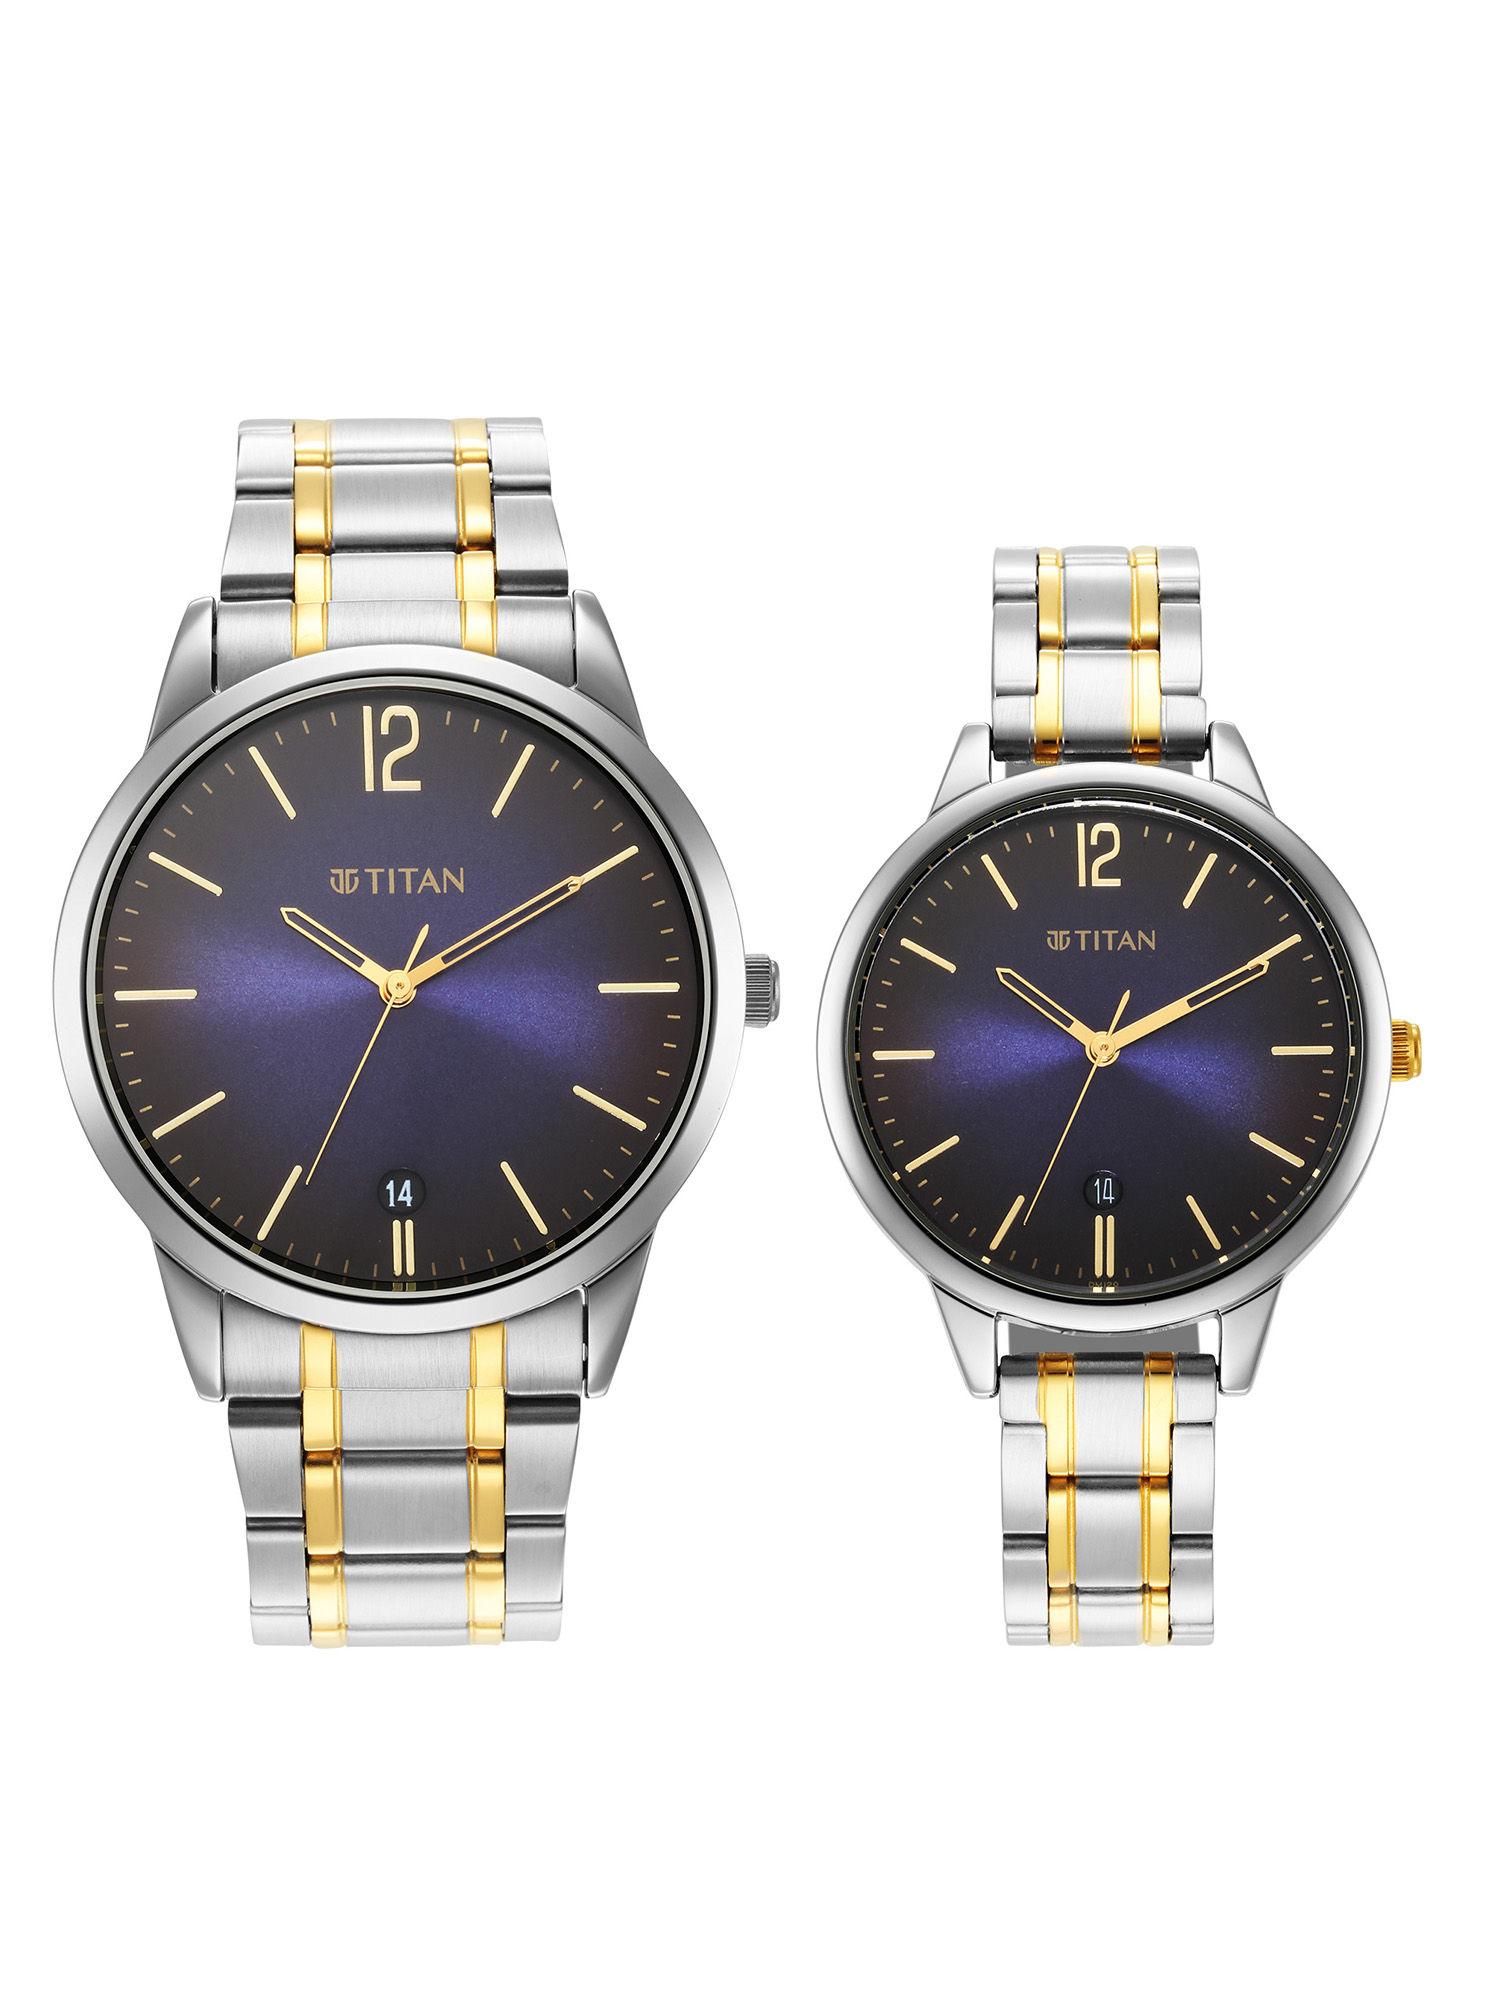 blue dial analog watch for couple (18062617bm01)